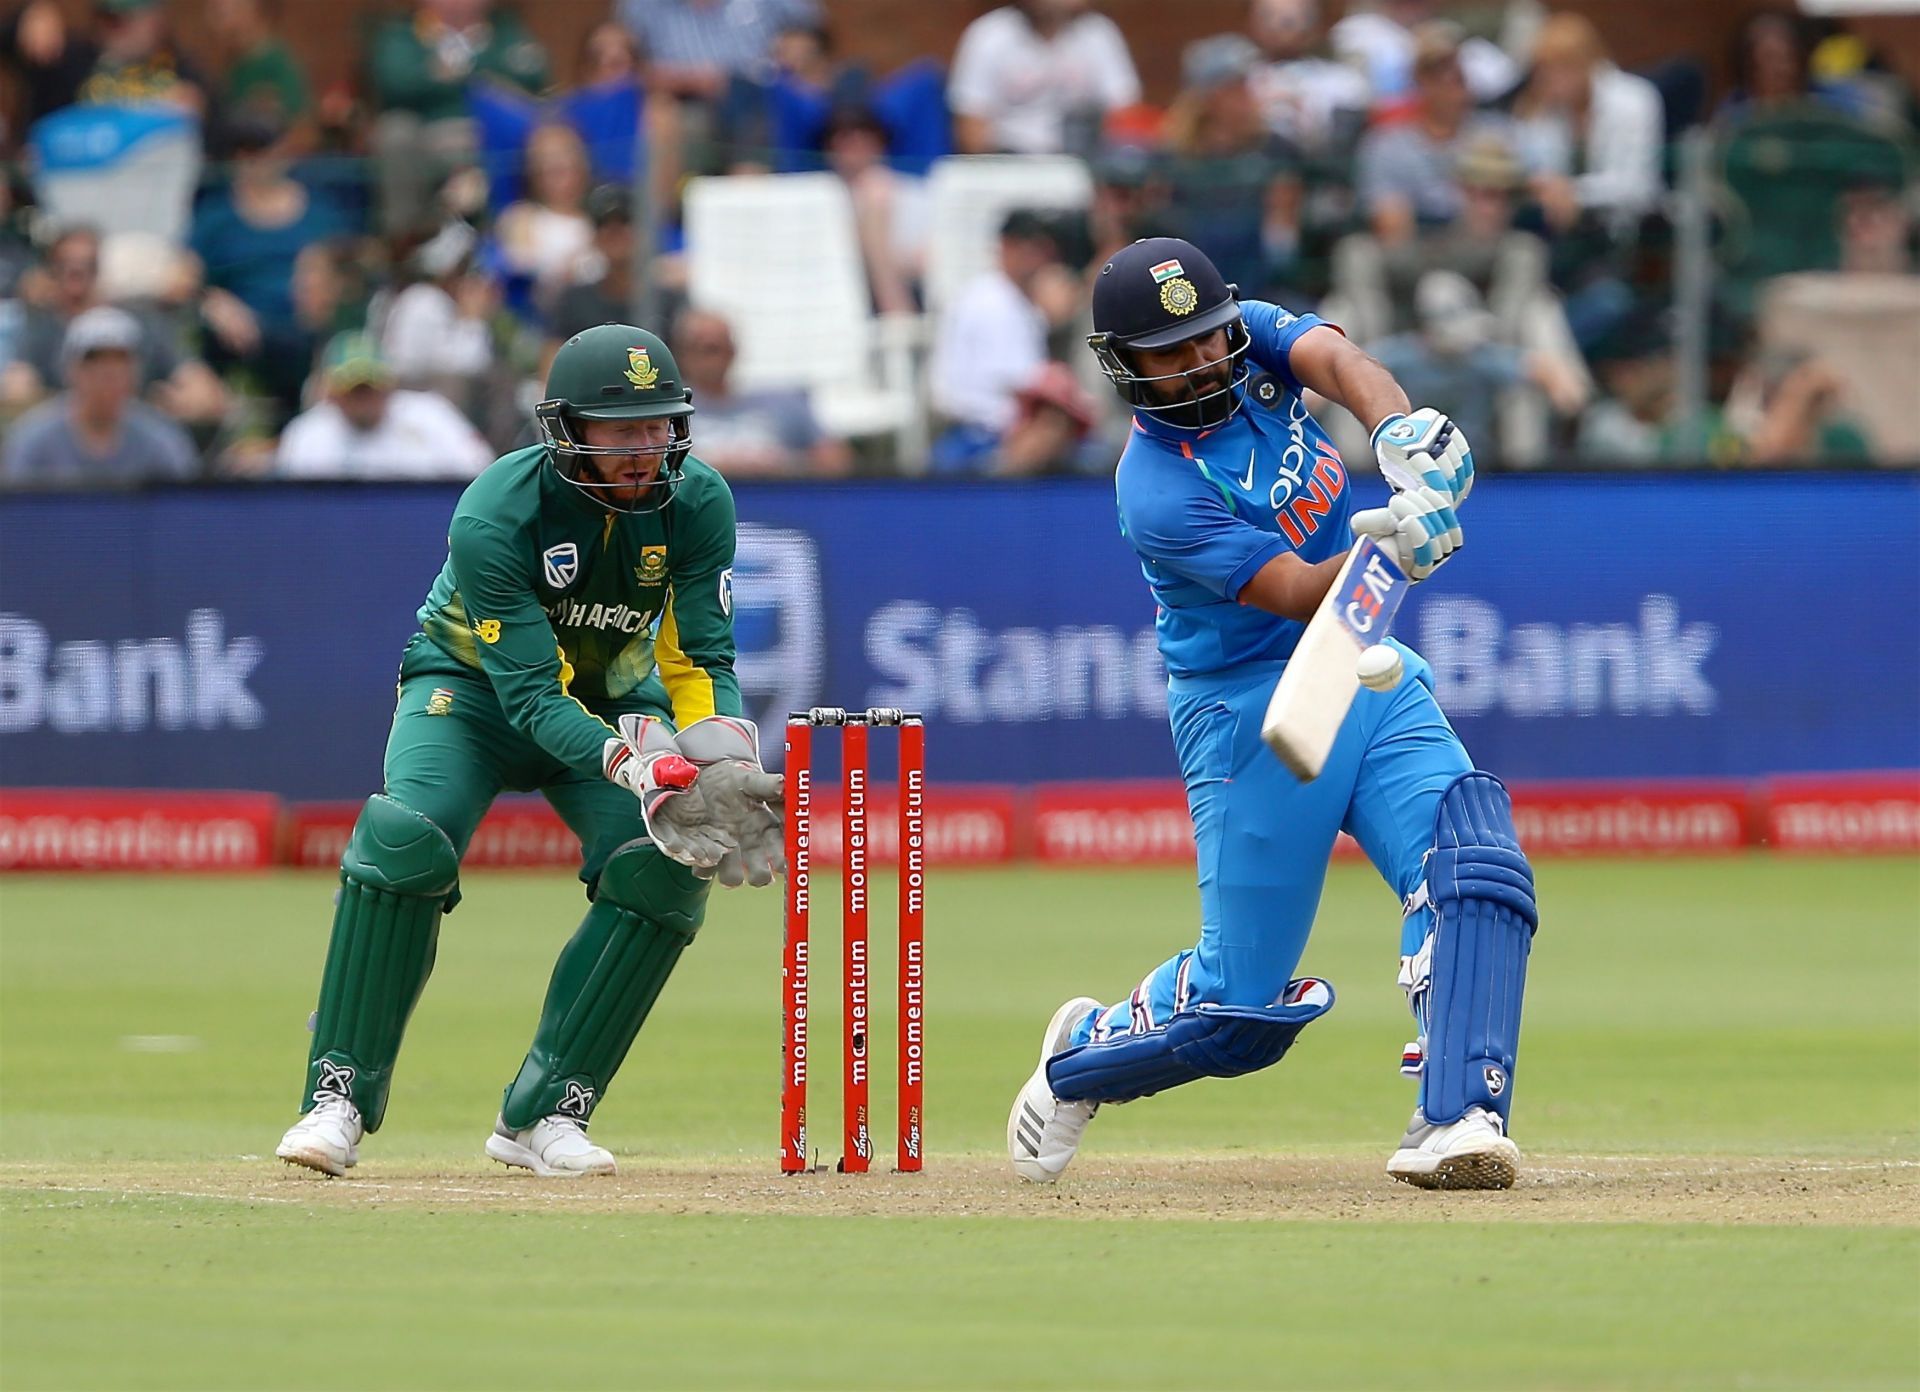 Rohit Sharma during the Port Elizabeth ODI in 2018. Pic: Getty Images